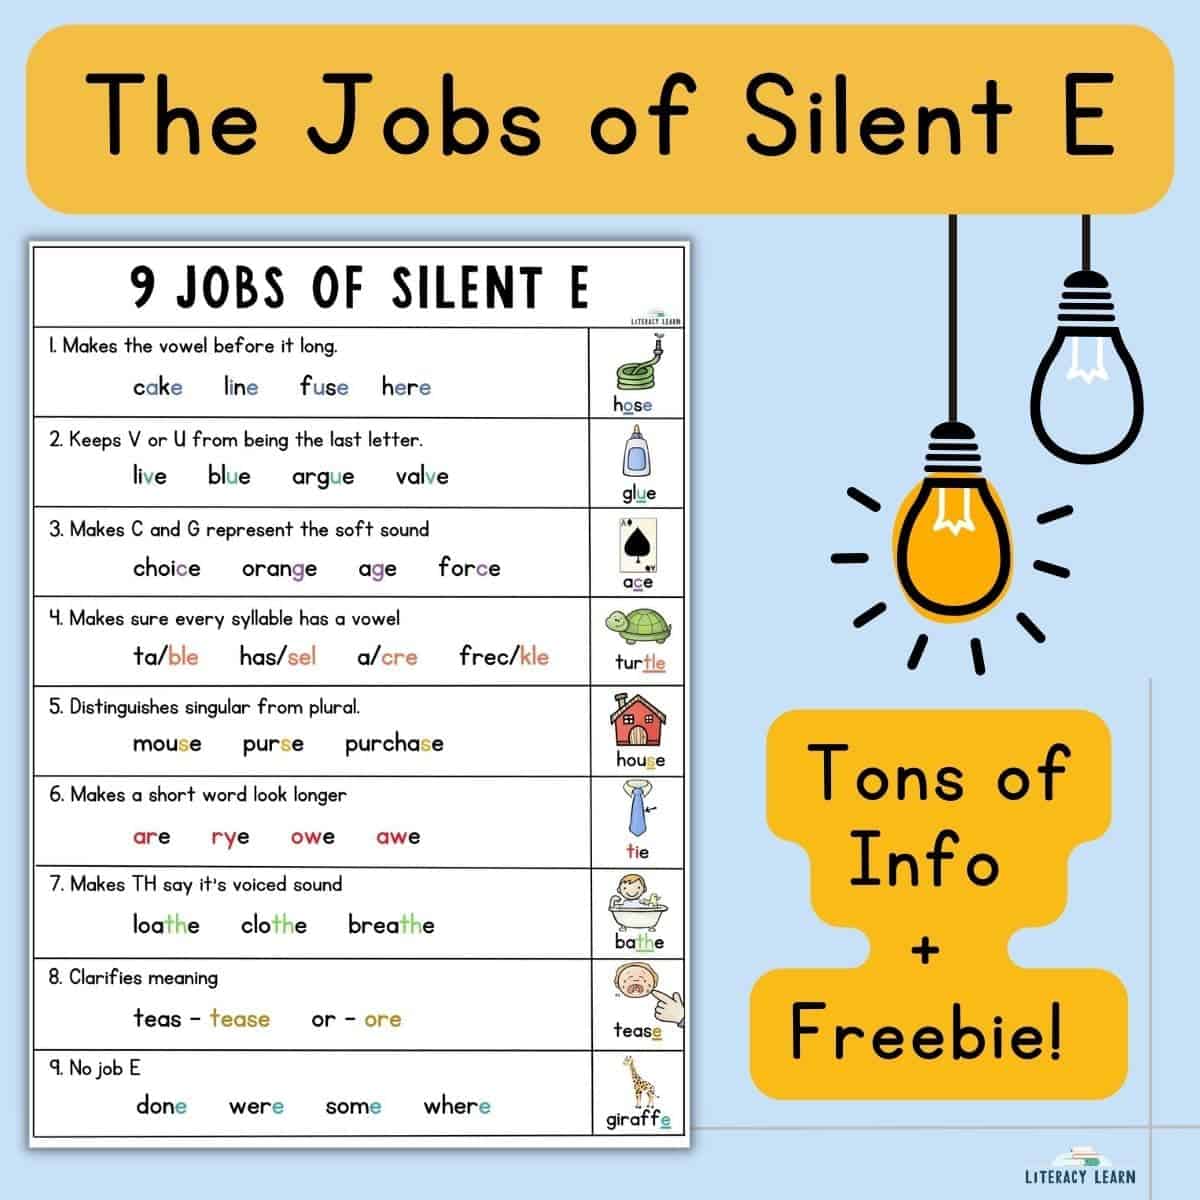 Graphic showing poster for the 9 jobs of the final silent E on blue background.